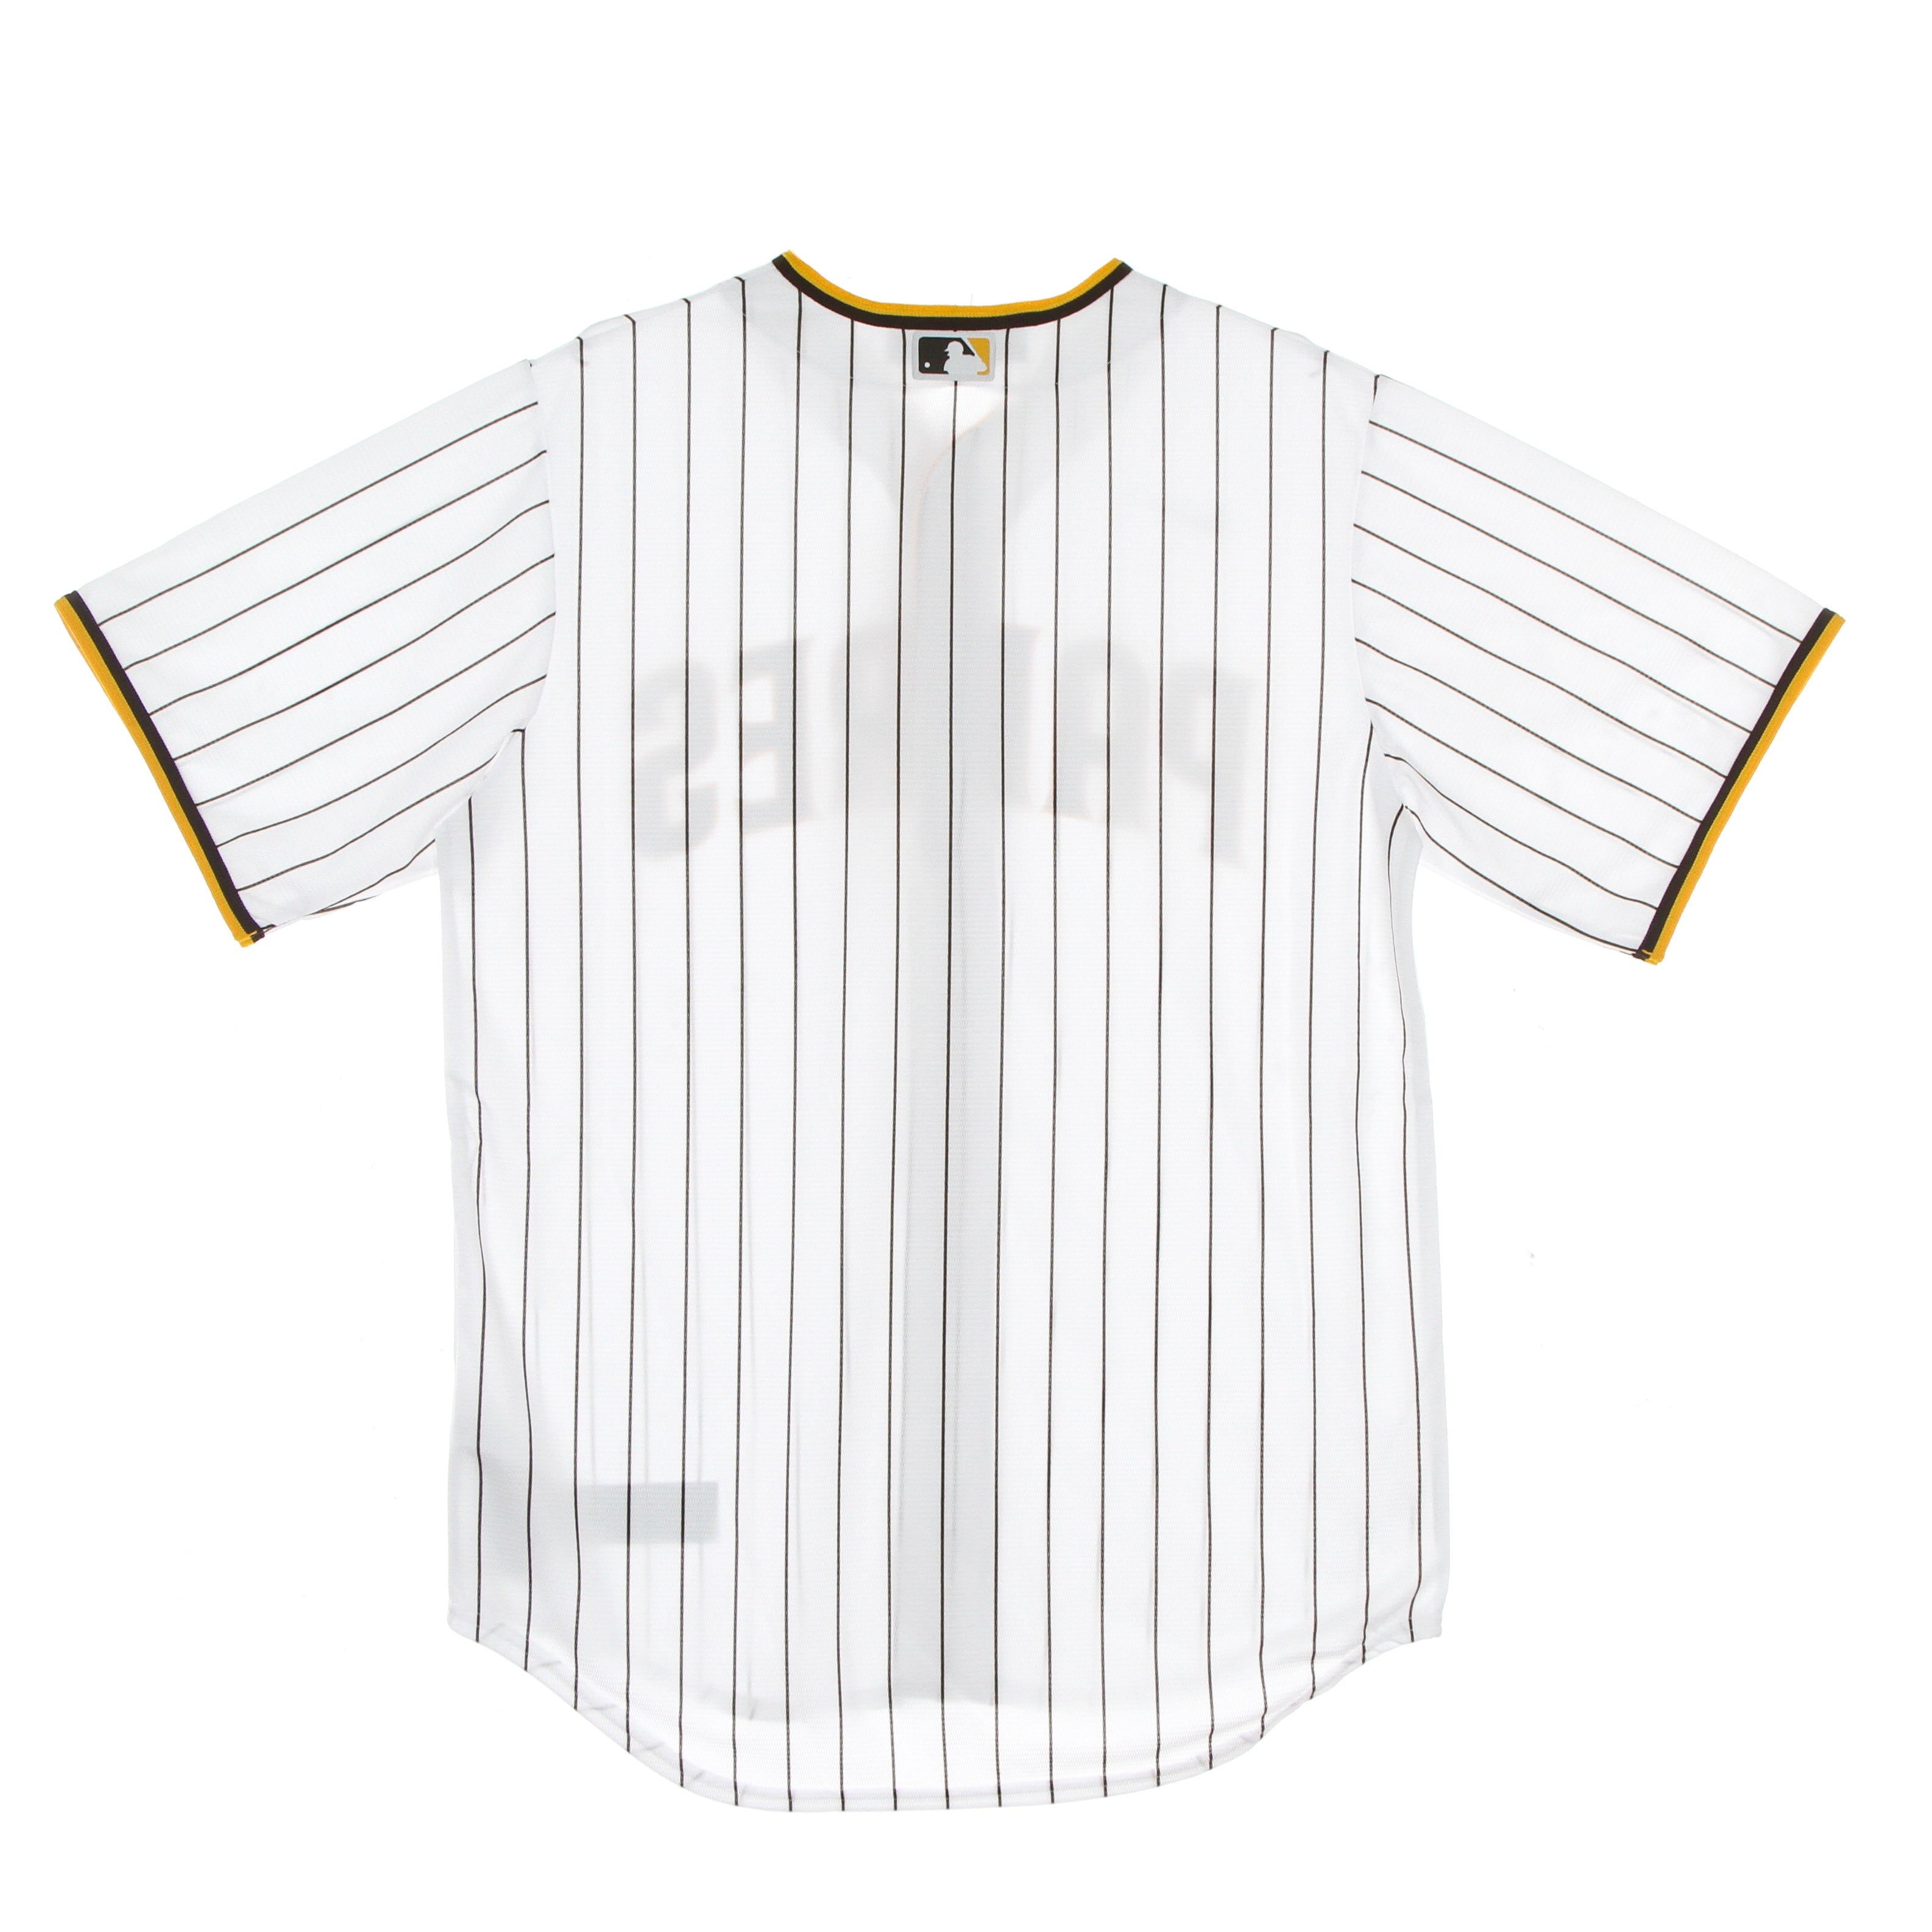 Men's MLB Official Replica Jersey Sadpad Home White Baseball Jacket